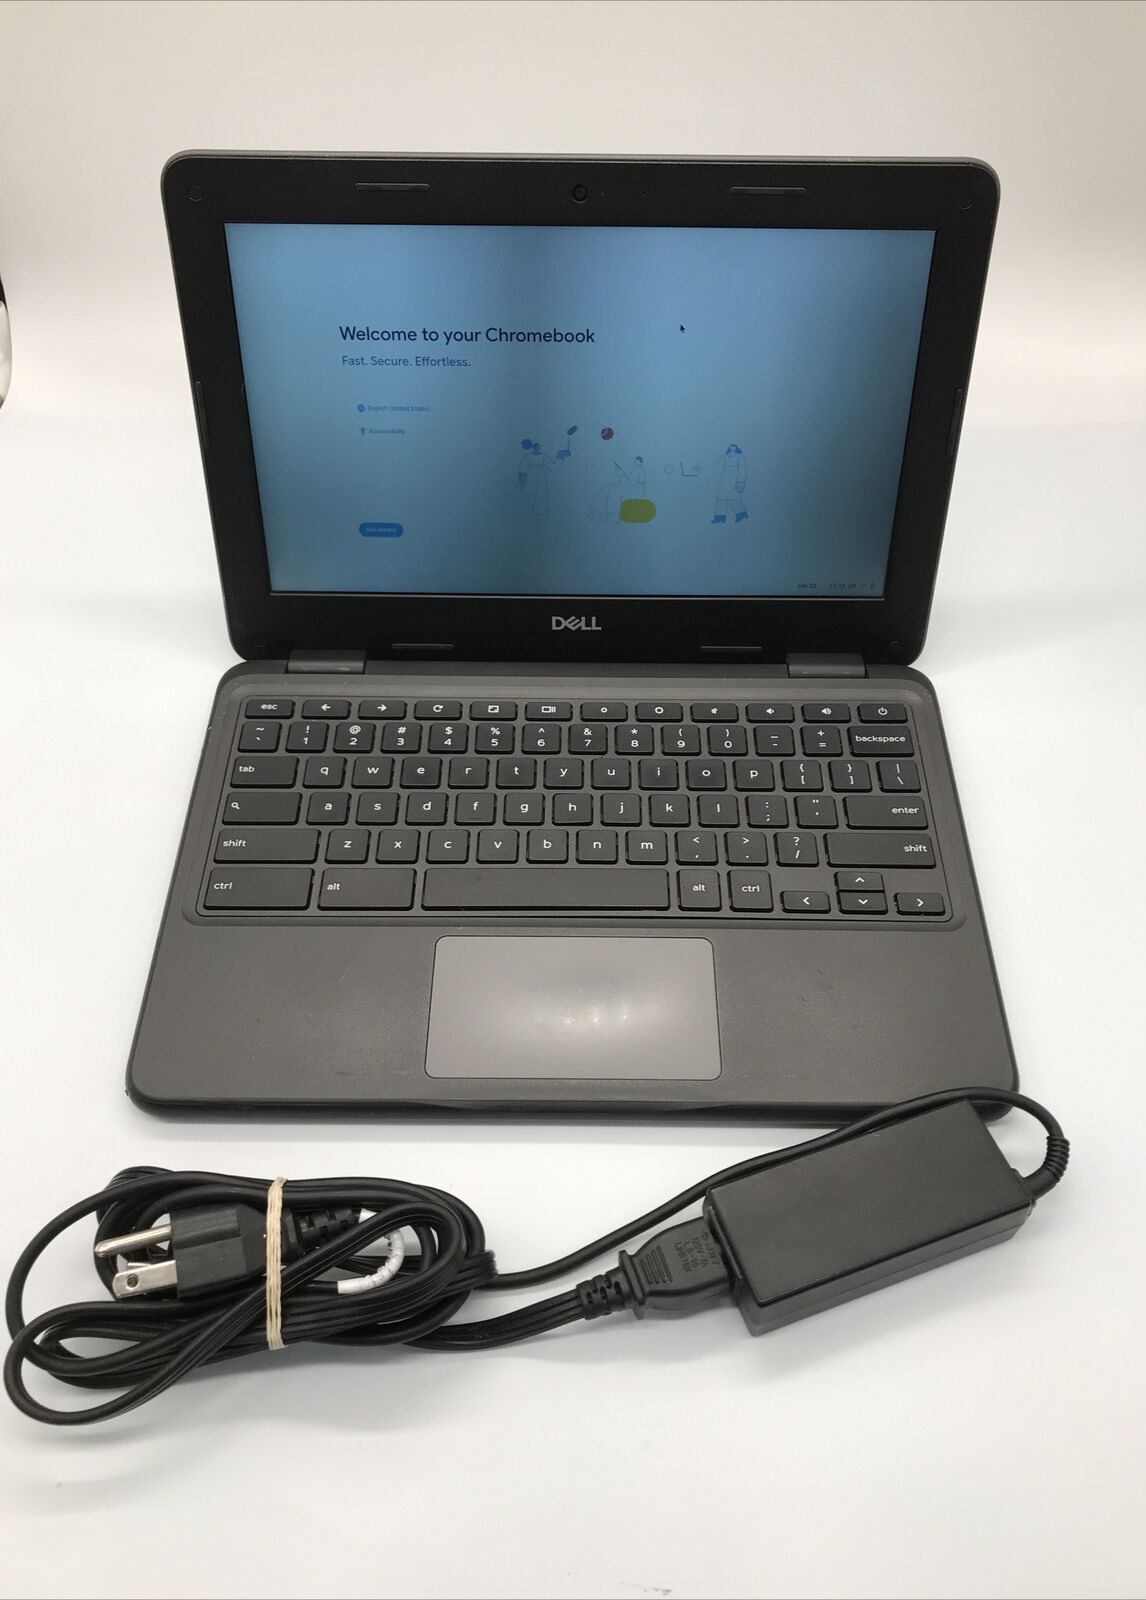 Dell Chromebook 3100 4GB 32 GB P29T P29T001 Fair Condition With Power Adapter